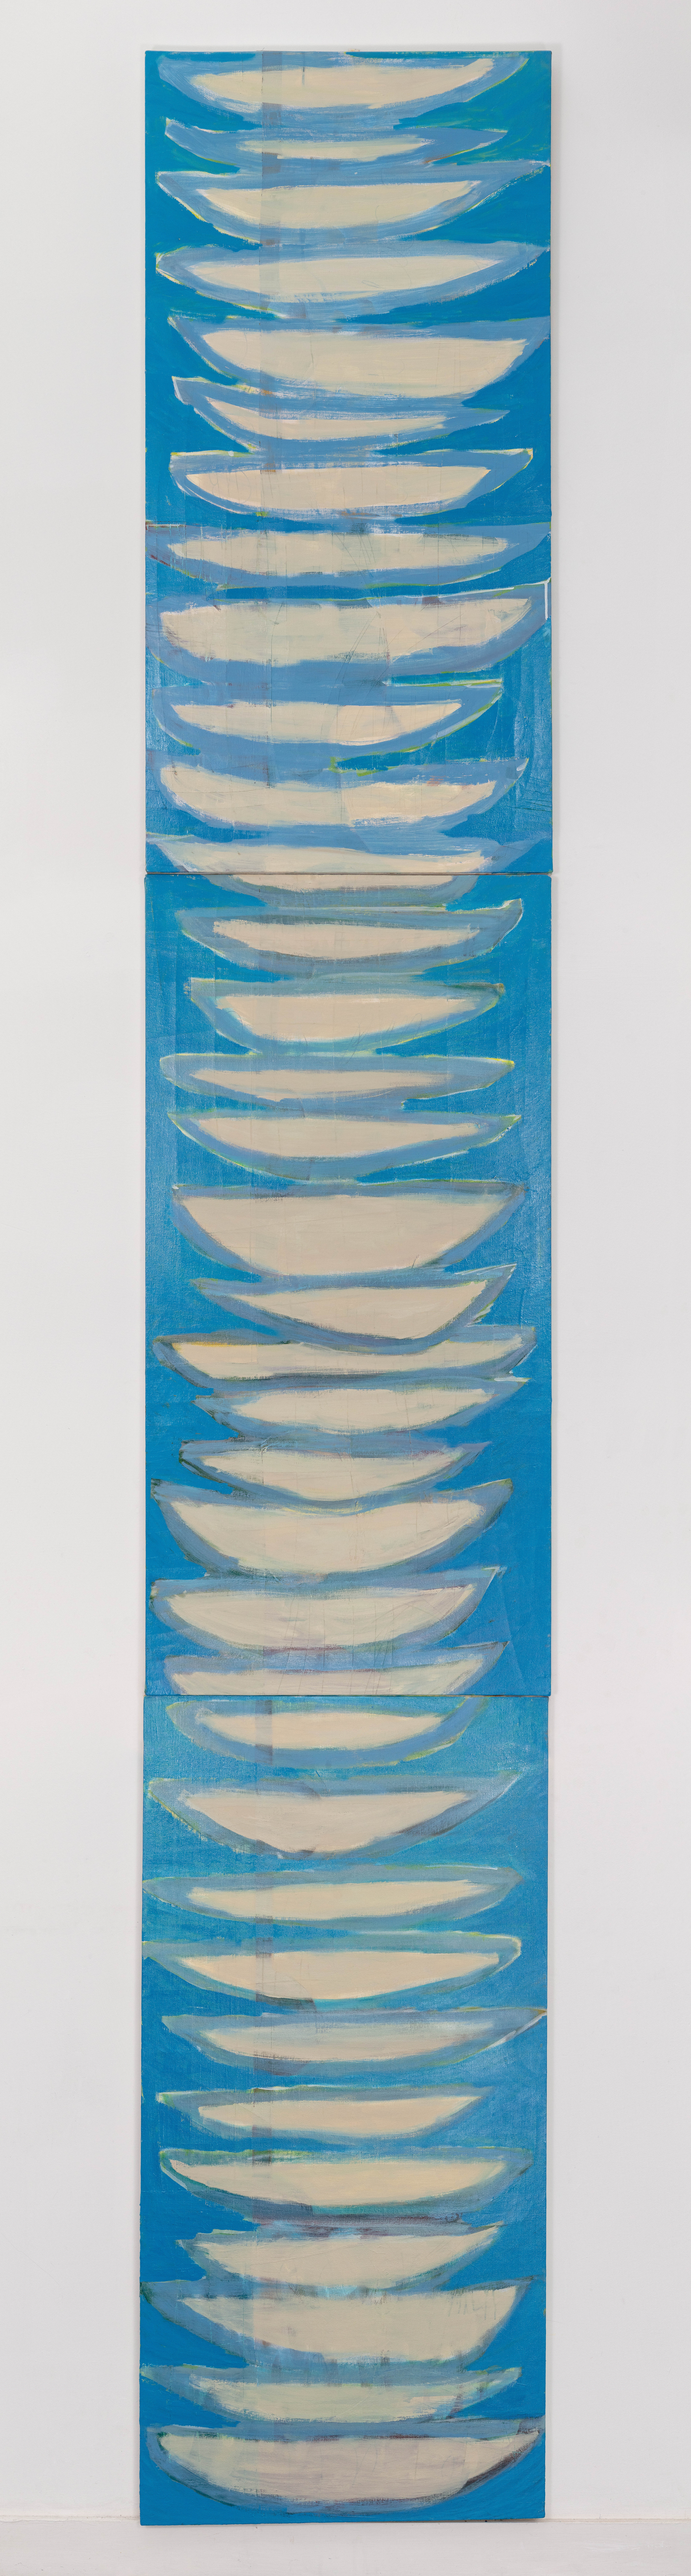 Stacked, oil on canvas, vertical triptych, 369 x 61cm, by Sarah Kudirka artist, blue background with beige unevenly matched shallow bowls/boats stacked precariously, seeming about to topple.